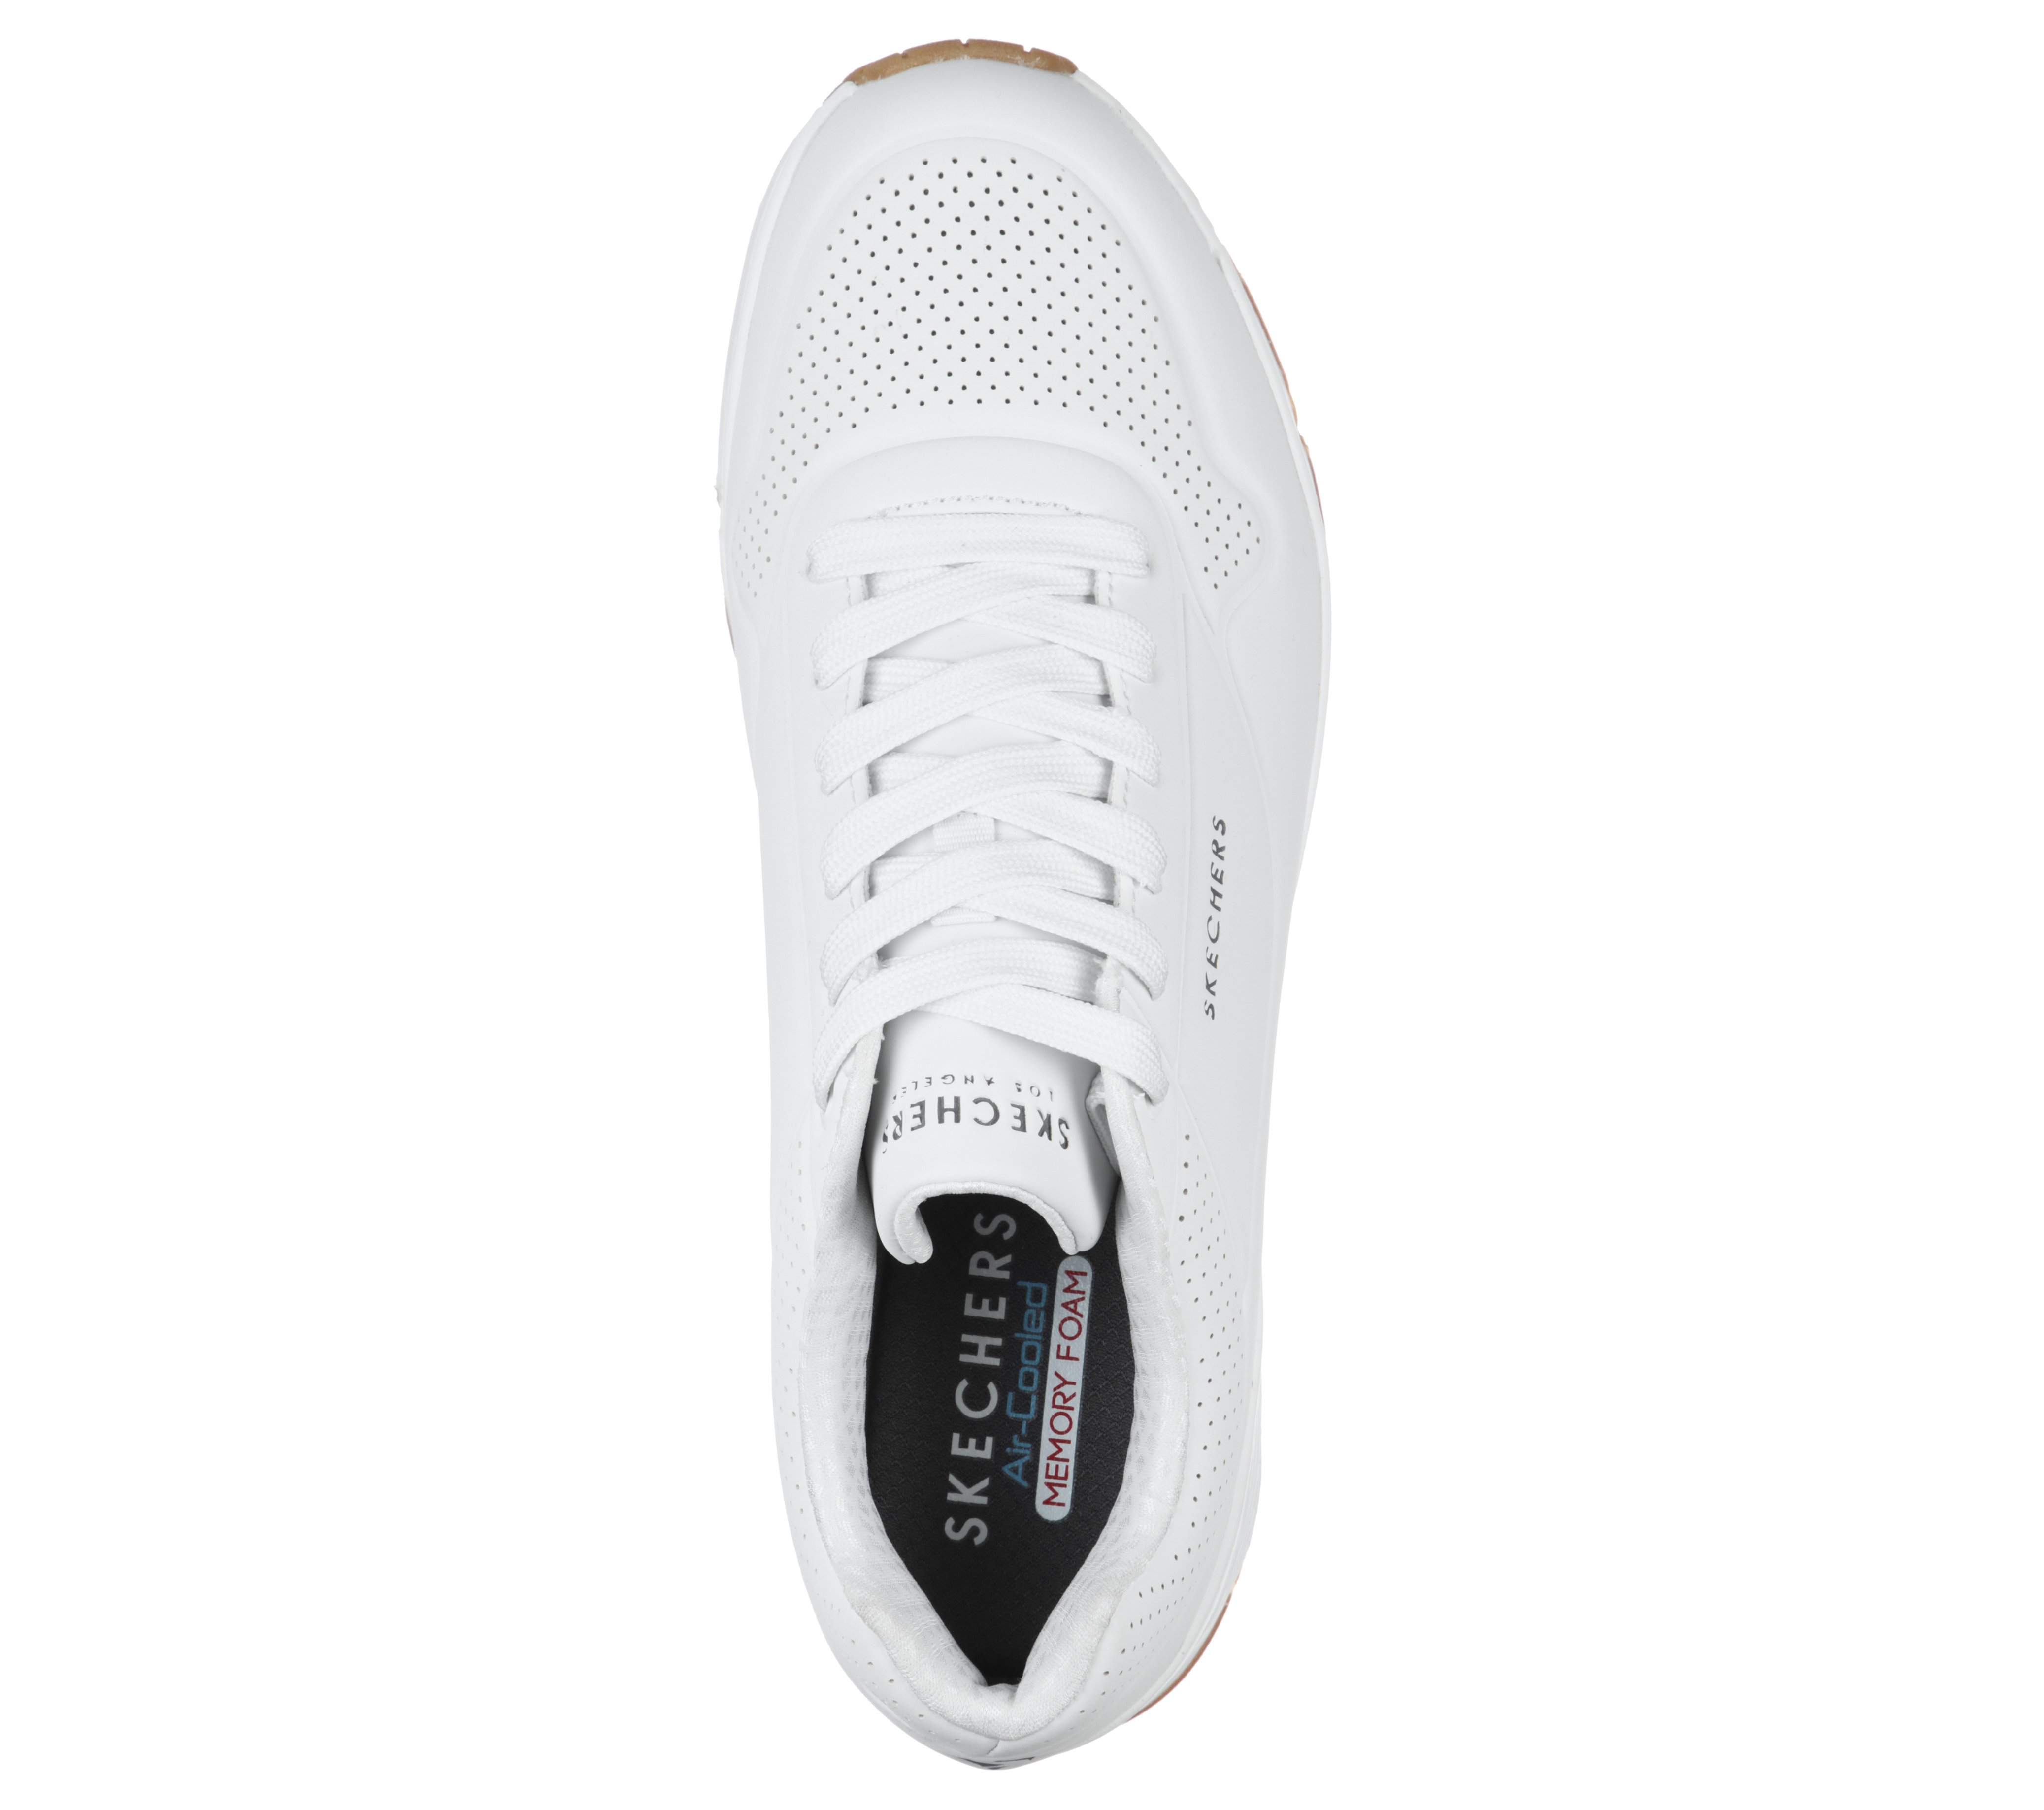 Uno Stand On Air SKECHERS CH